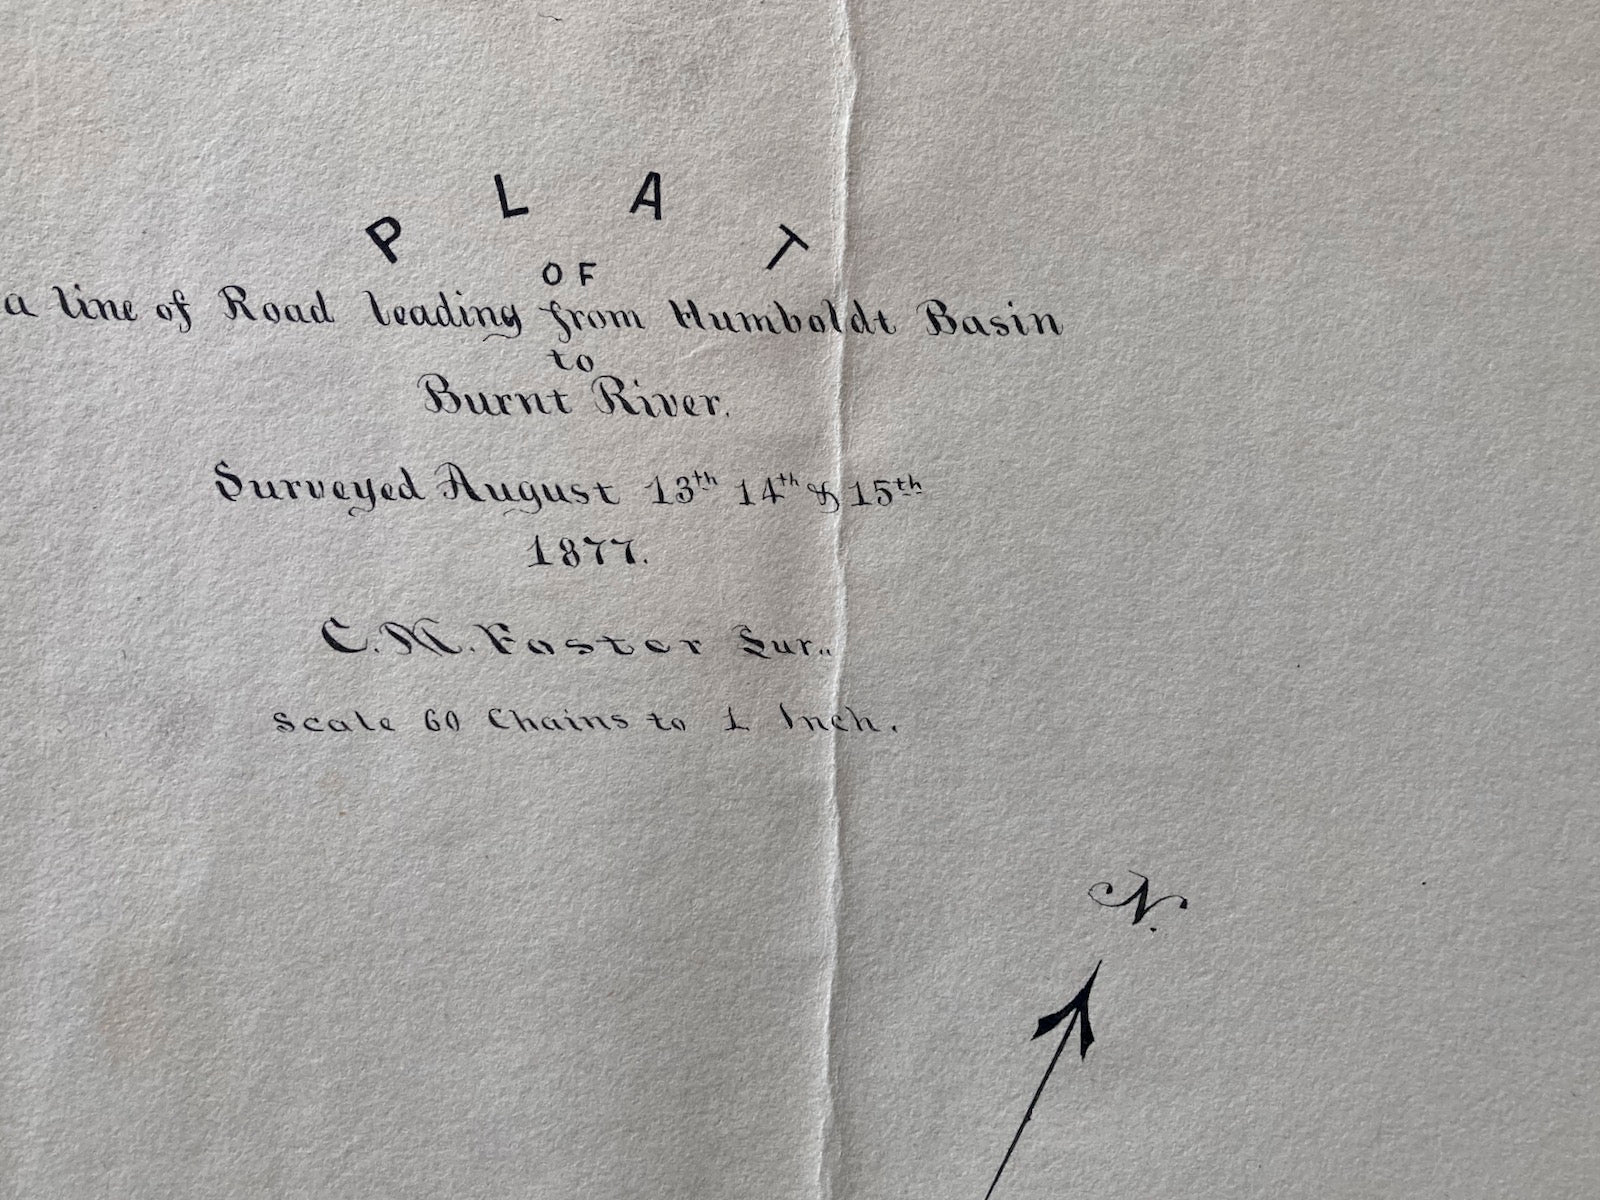 1877 Plat of a line of road from Humboldt Basin to Burnt River Rd  Map C. M . Foster